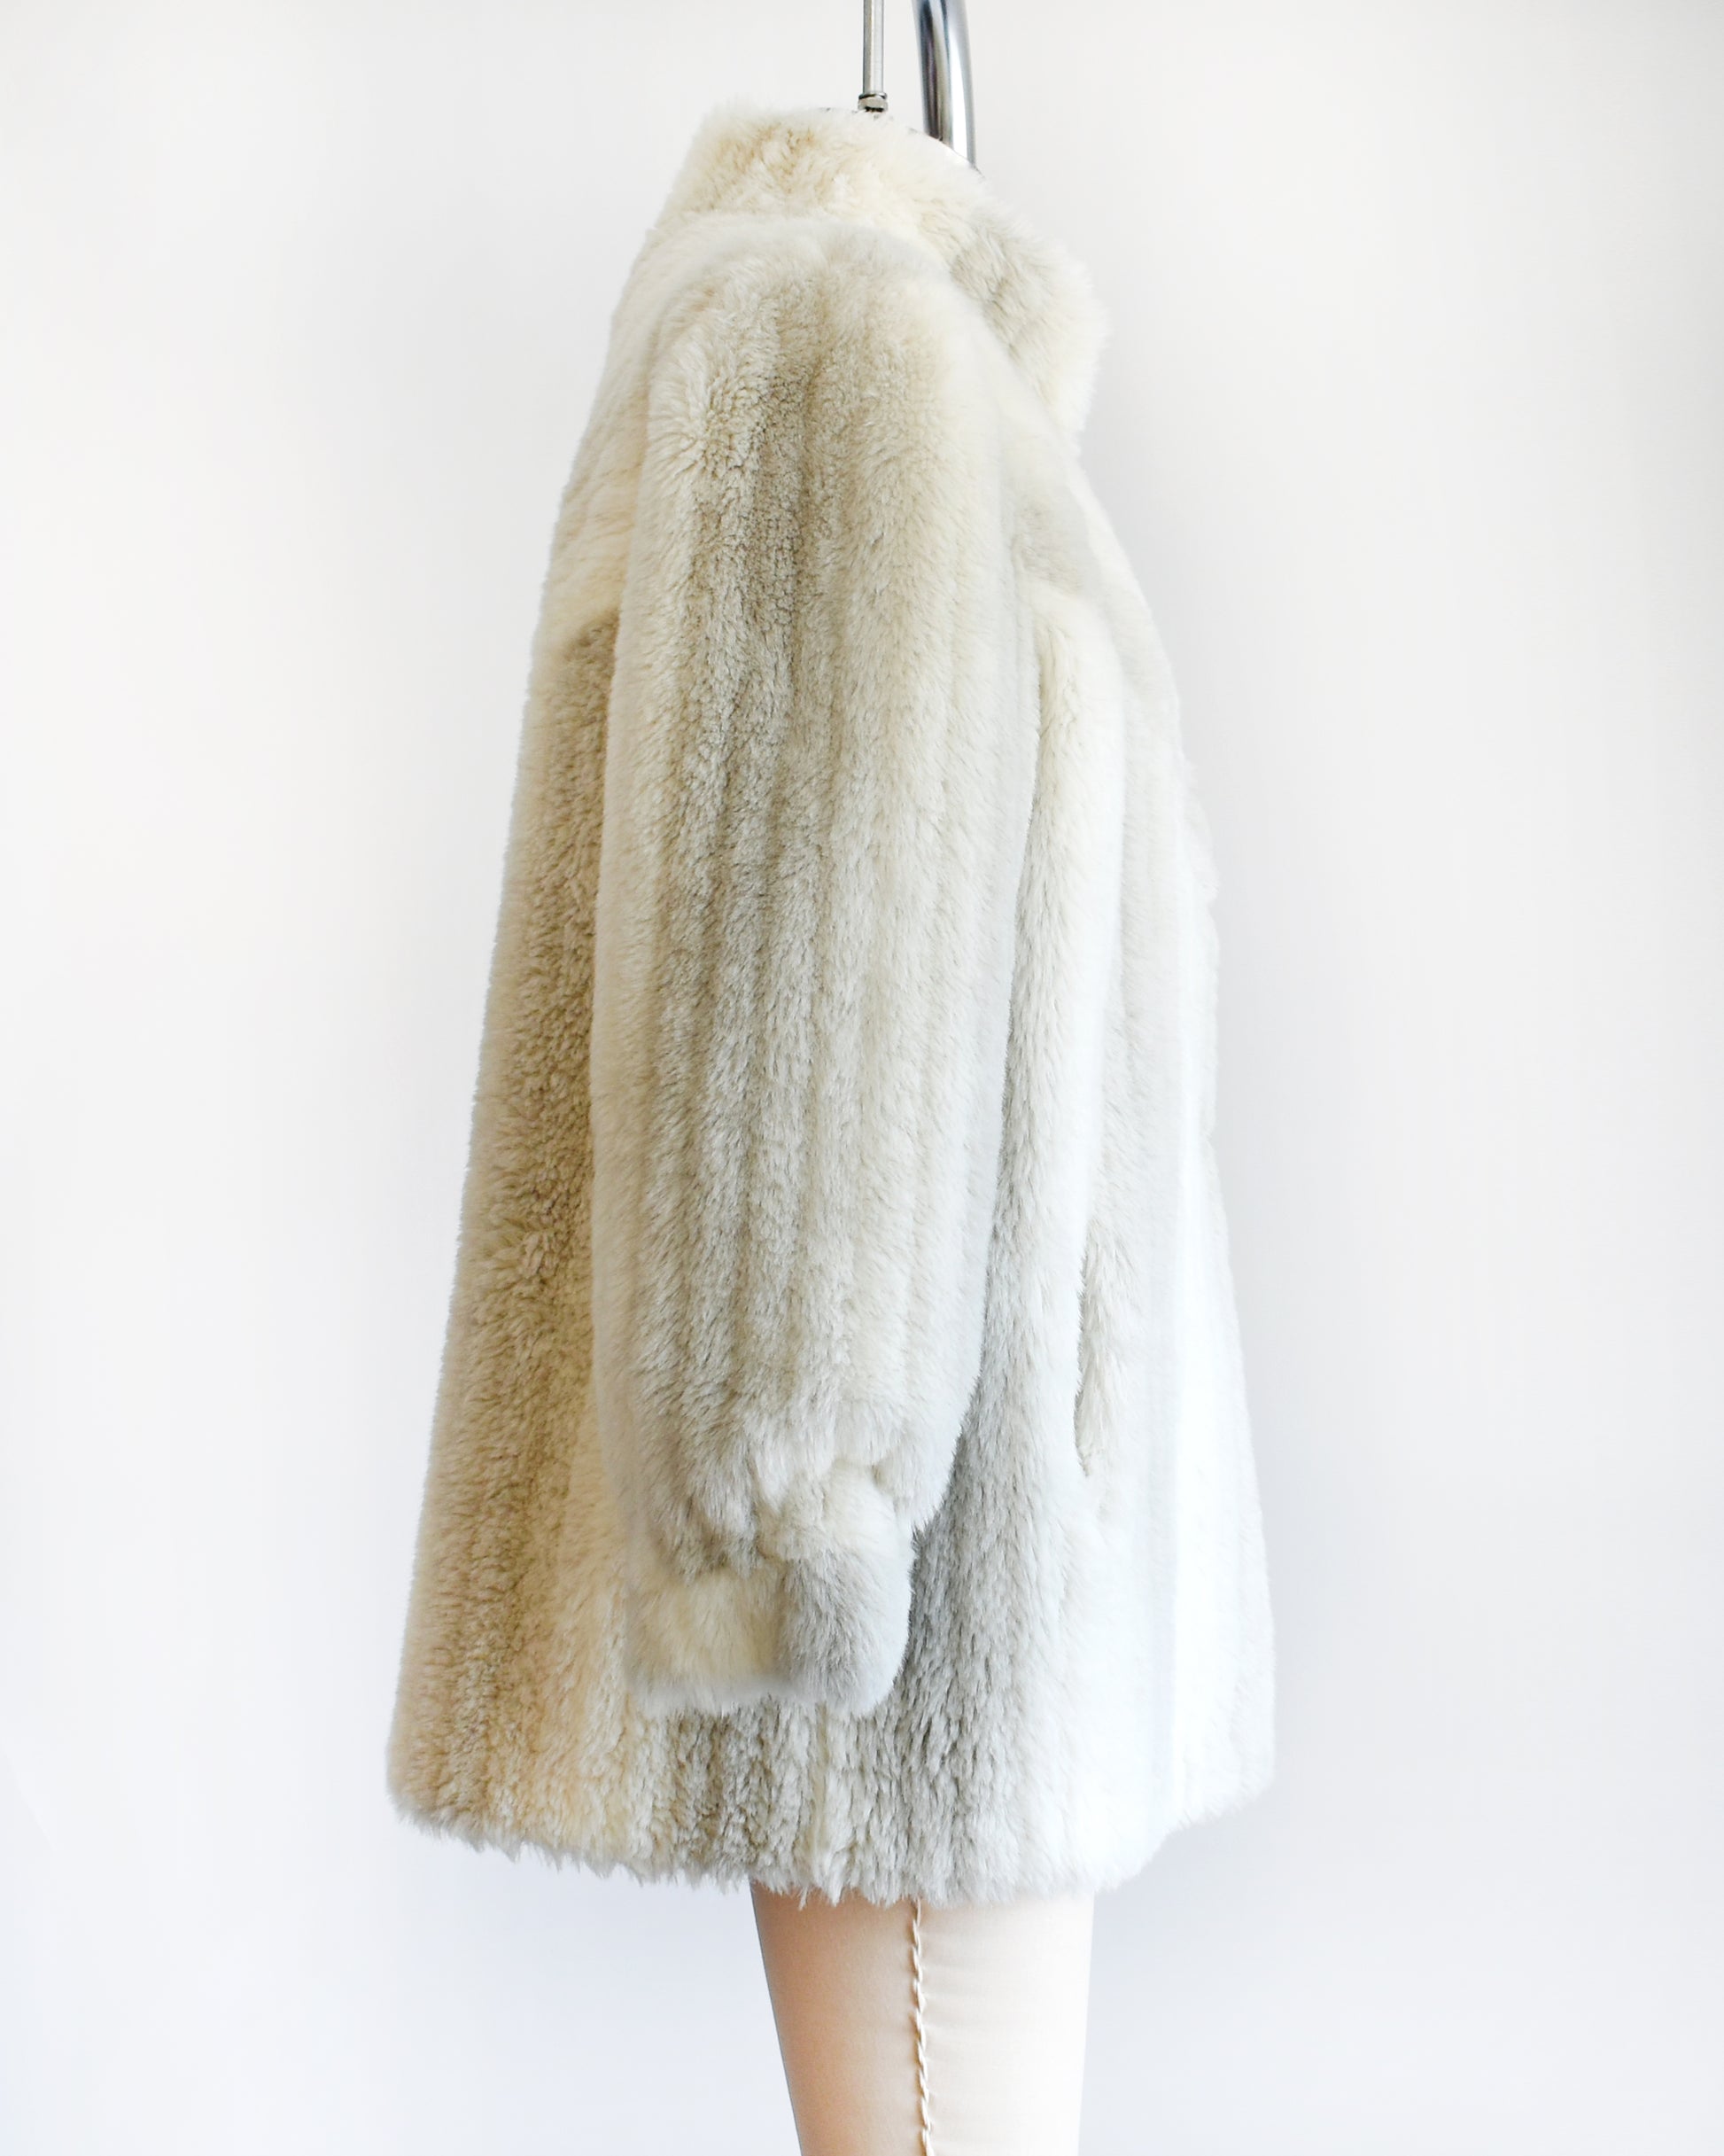 Side view of a vintage 70s/80s faux fur coat is made from a plush white faux fur with gray stripes, and features a stand-up collar with slightly puffed shoulders.